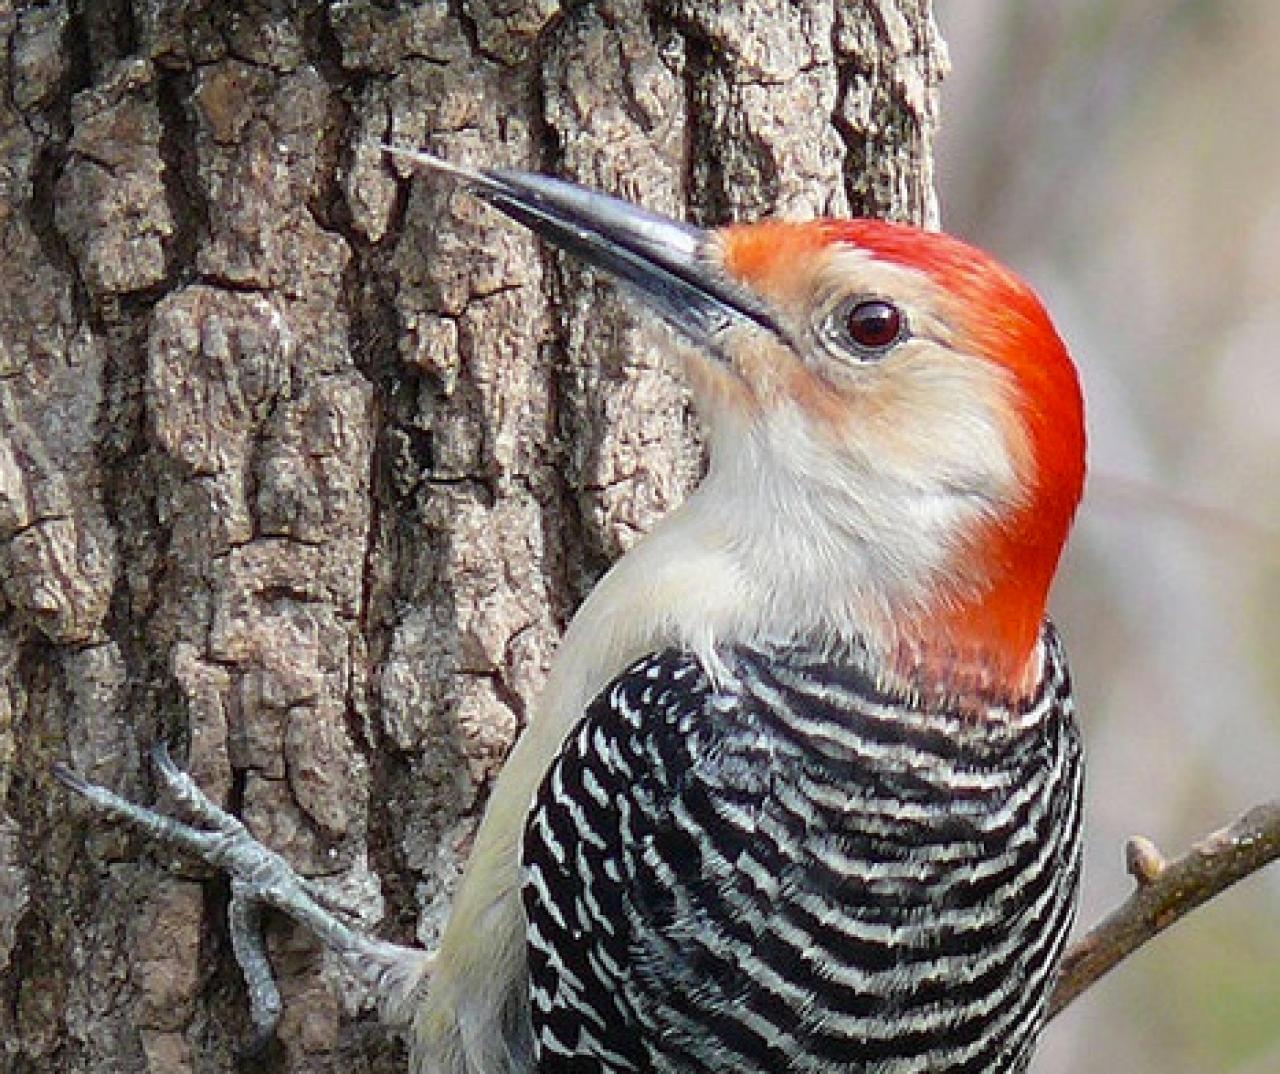 The drumming of the male red-bellied woodpecker resounds throughout the forest